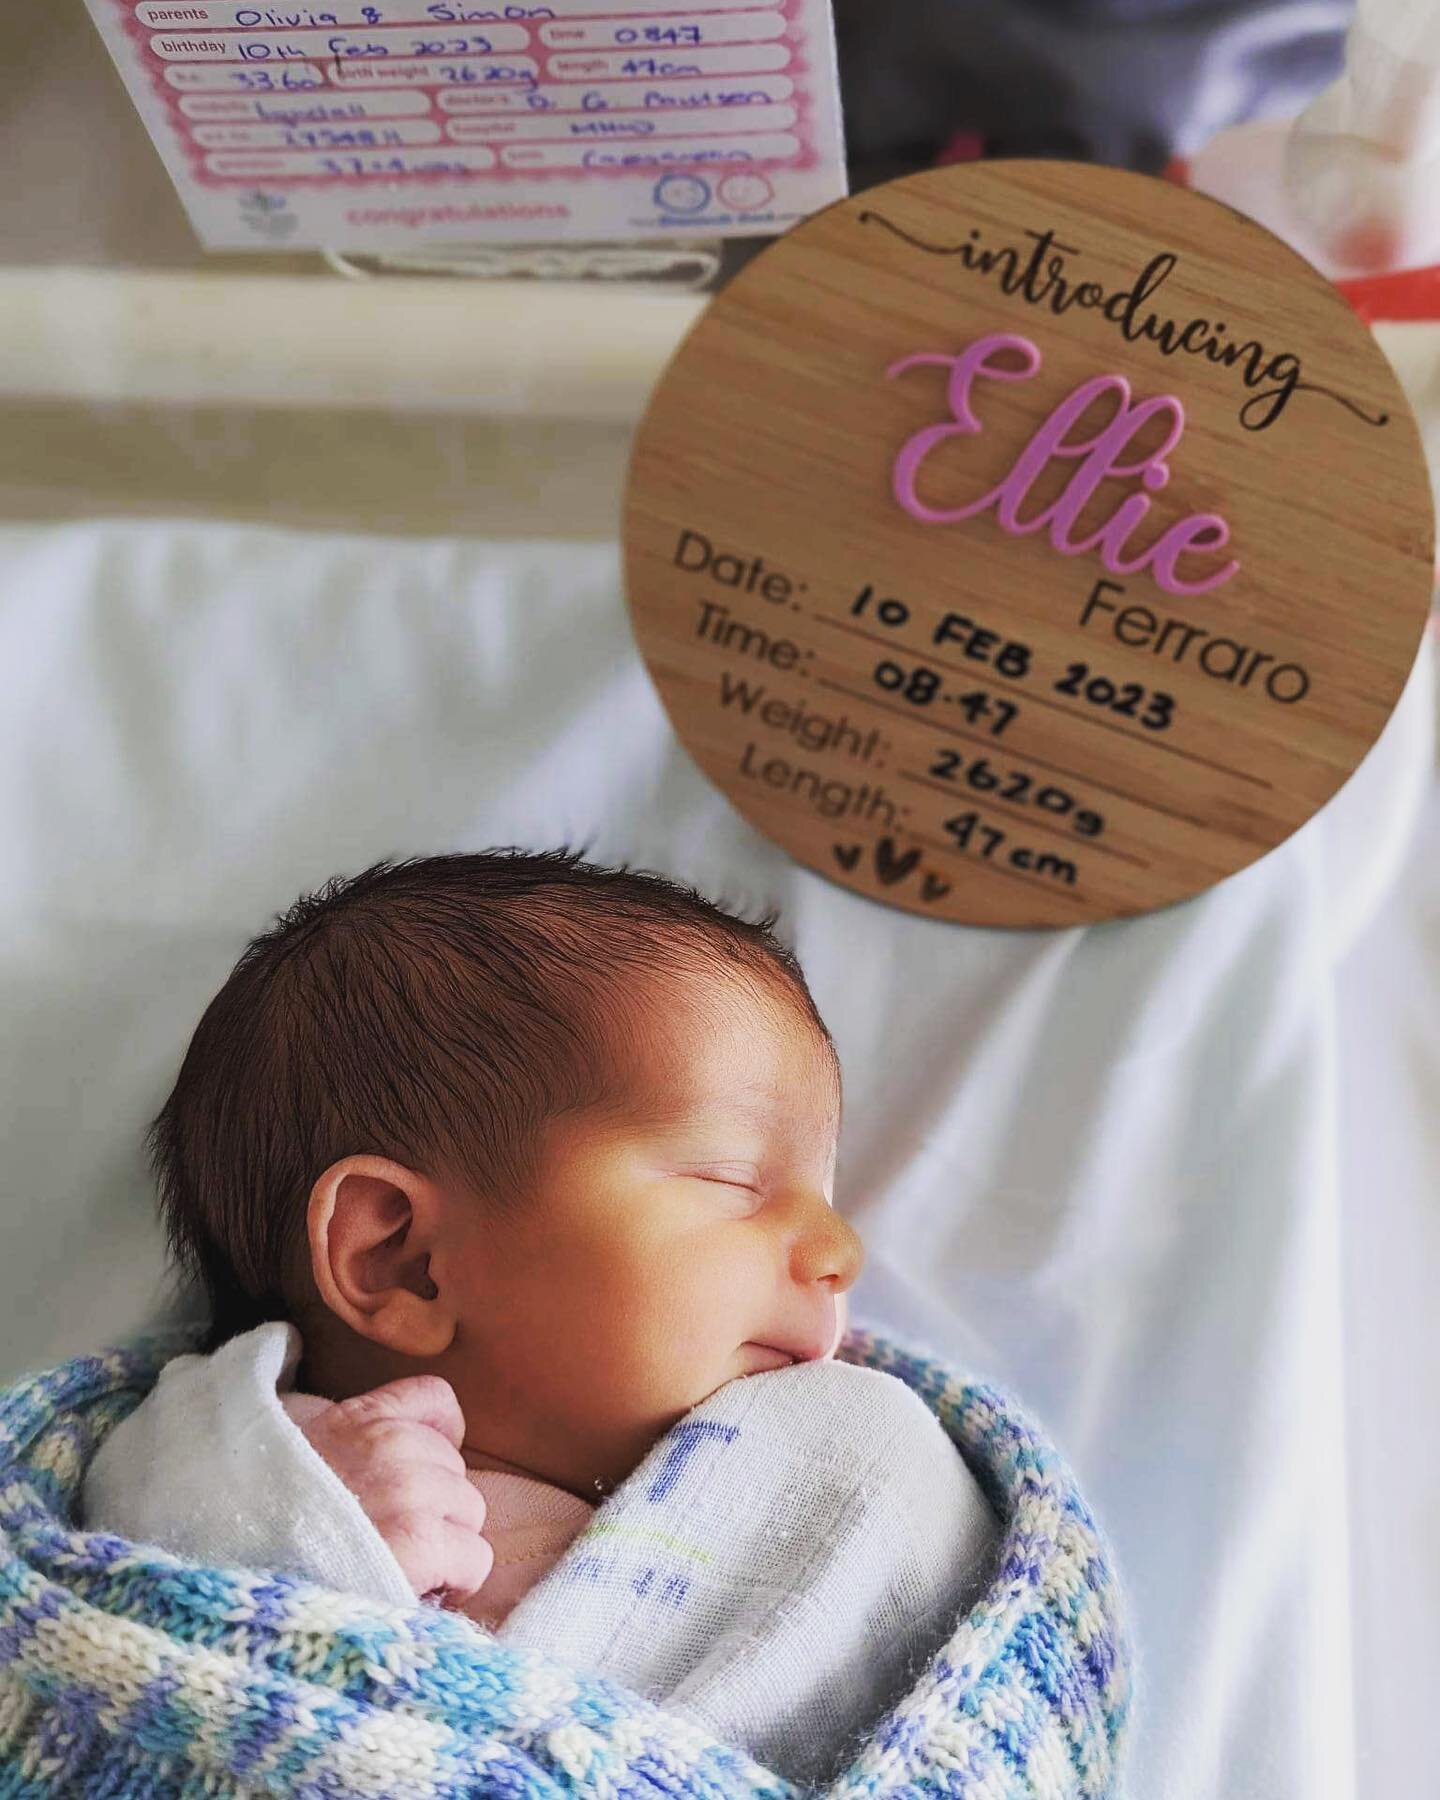 She&rsquo;s Here! Sharing our most precious news, the safe arrival of our baby girl Ellie ❤️

Mum and bubs are going strong, finding our feet after a few sleep elusive days/nights. 
And adored by her big brother, the best hand holder ever.

Thank you